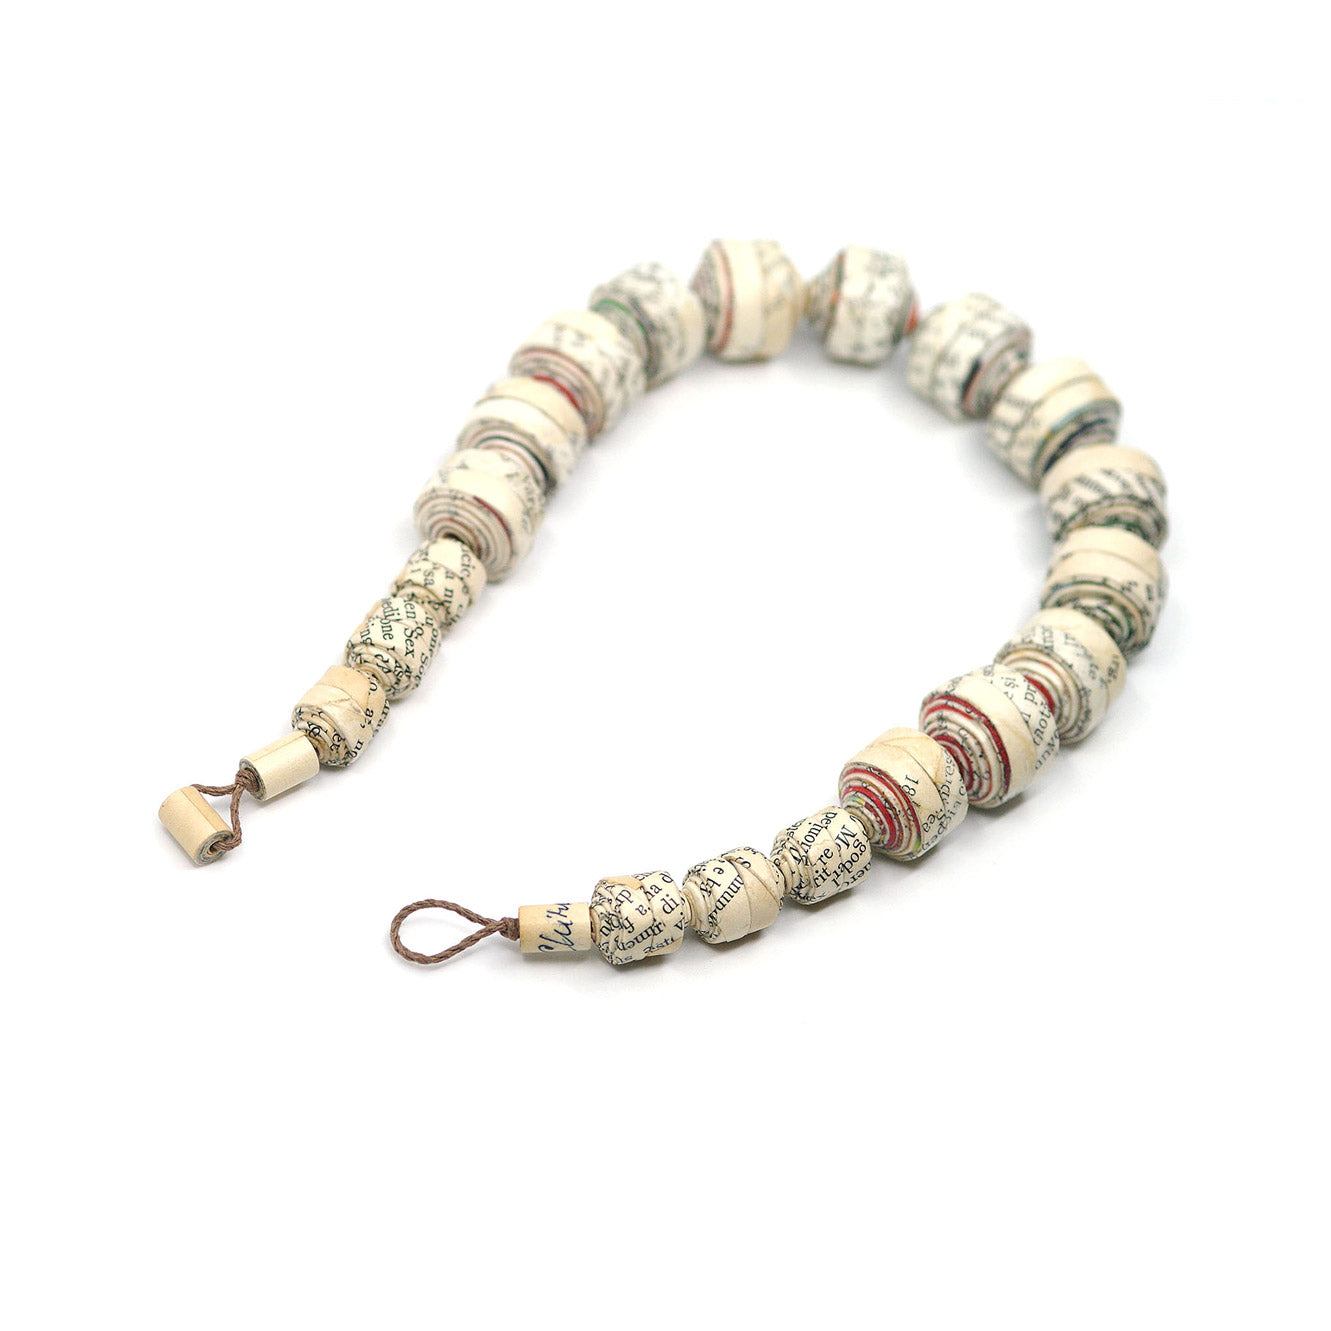 Big Round Beads Upcycled Paper Necklace Palimpsest Collection Chiramo Paper Jewelry